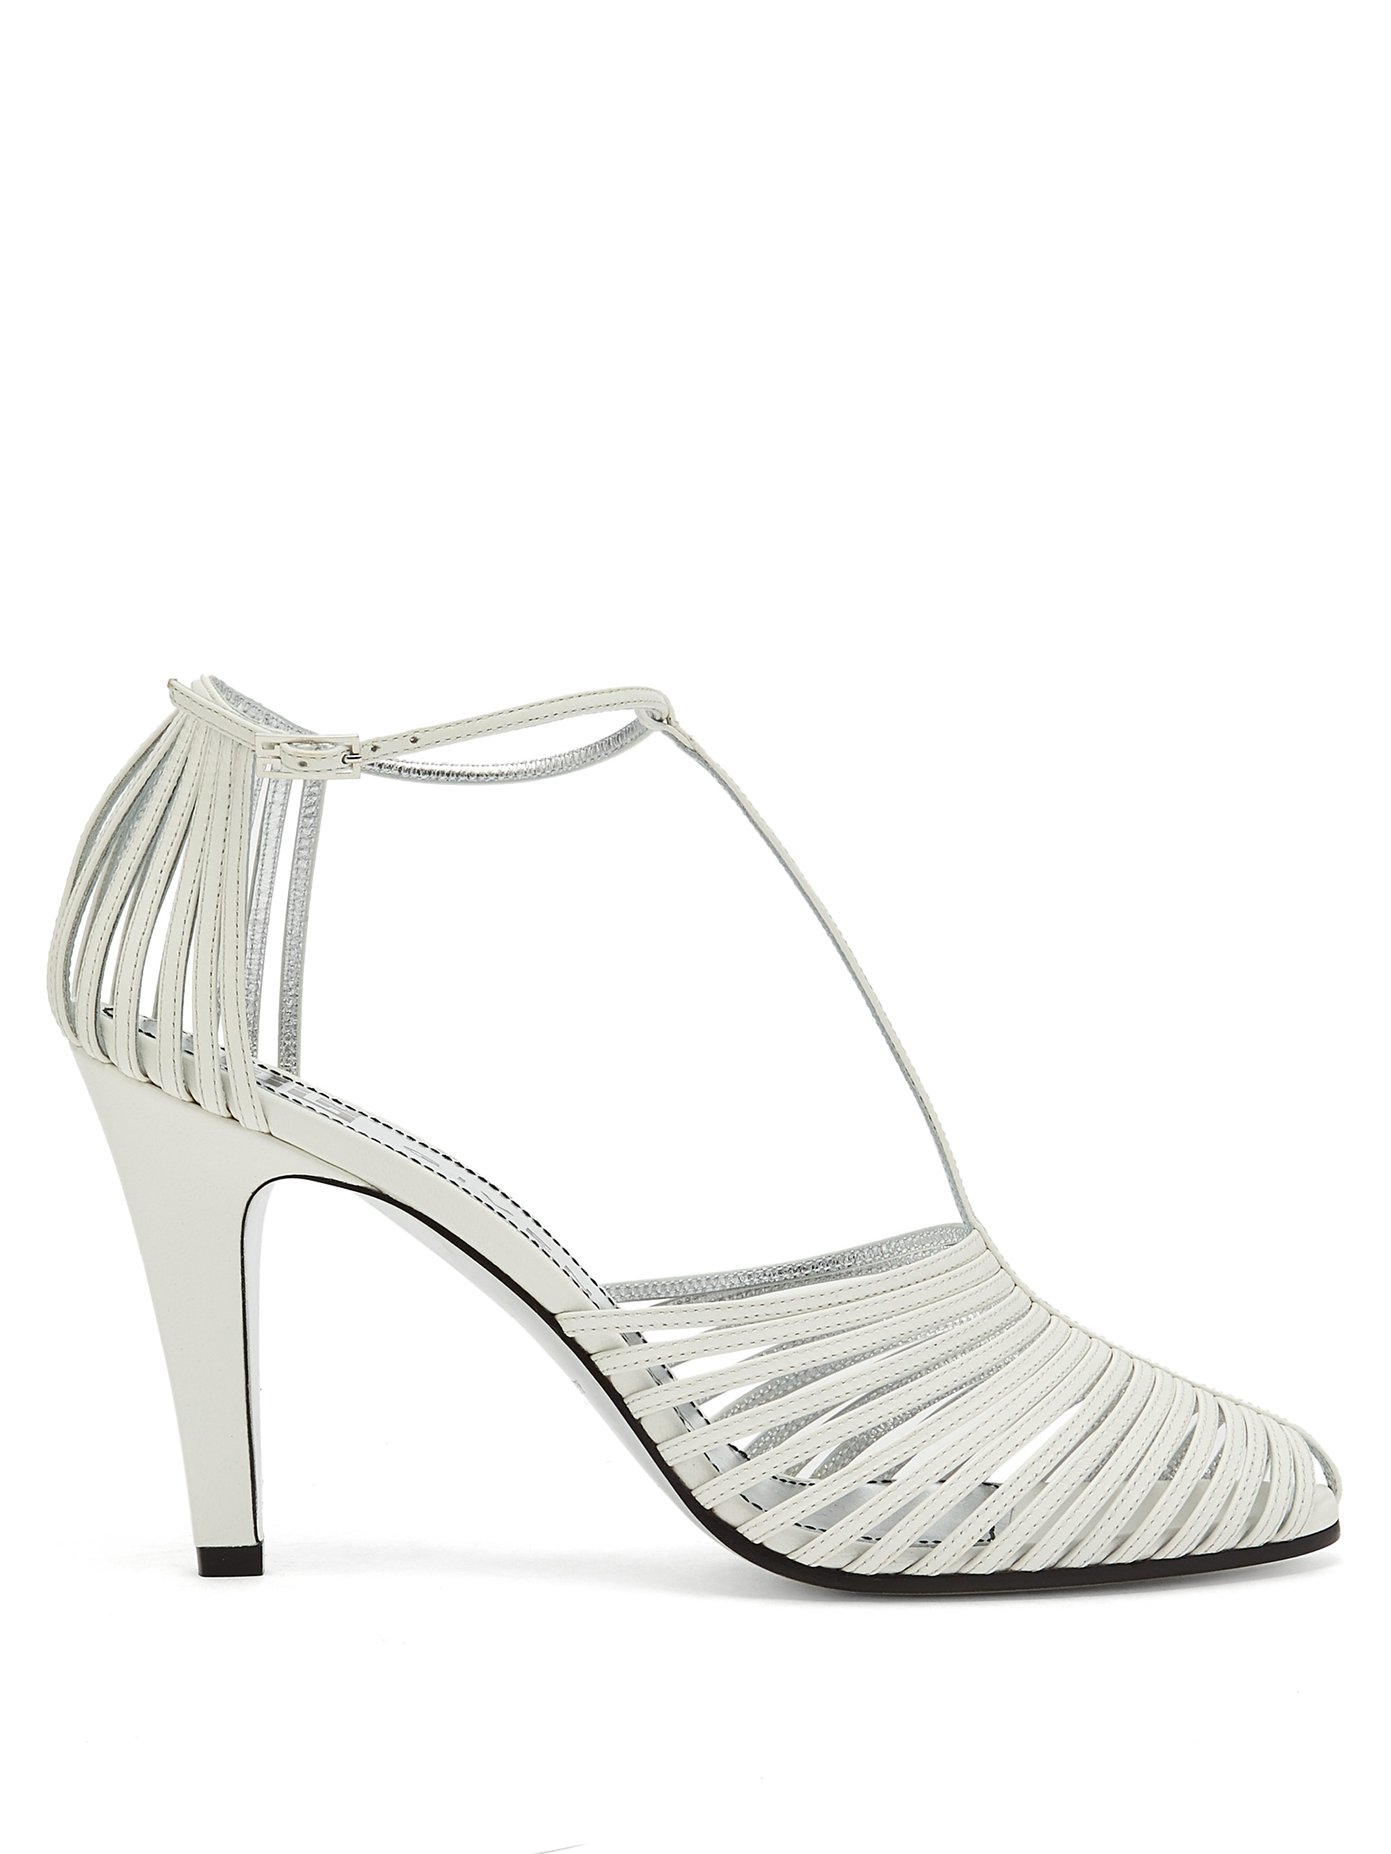 givenchy white sandals